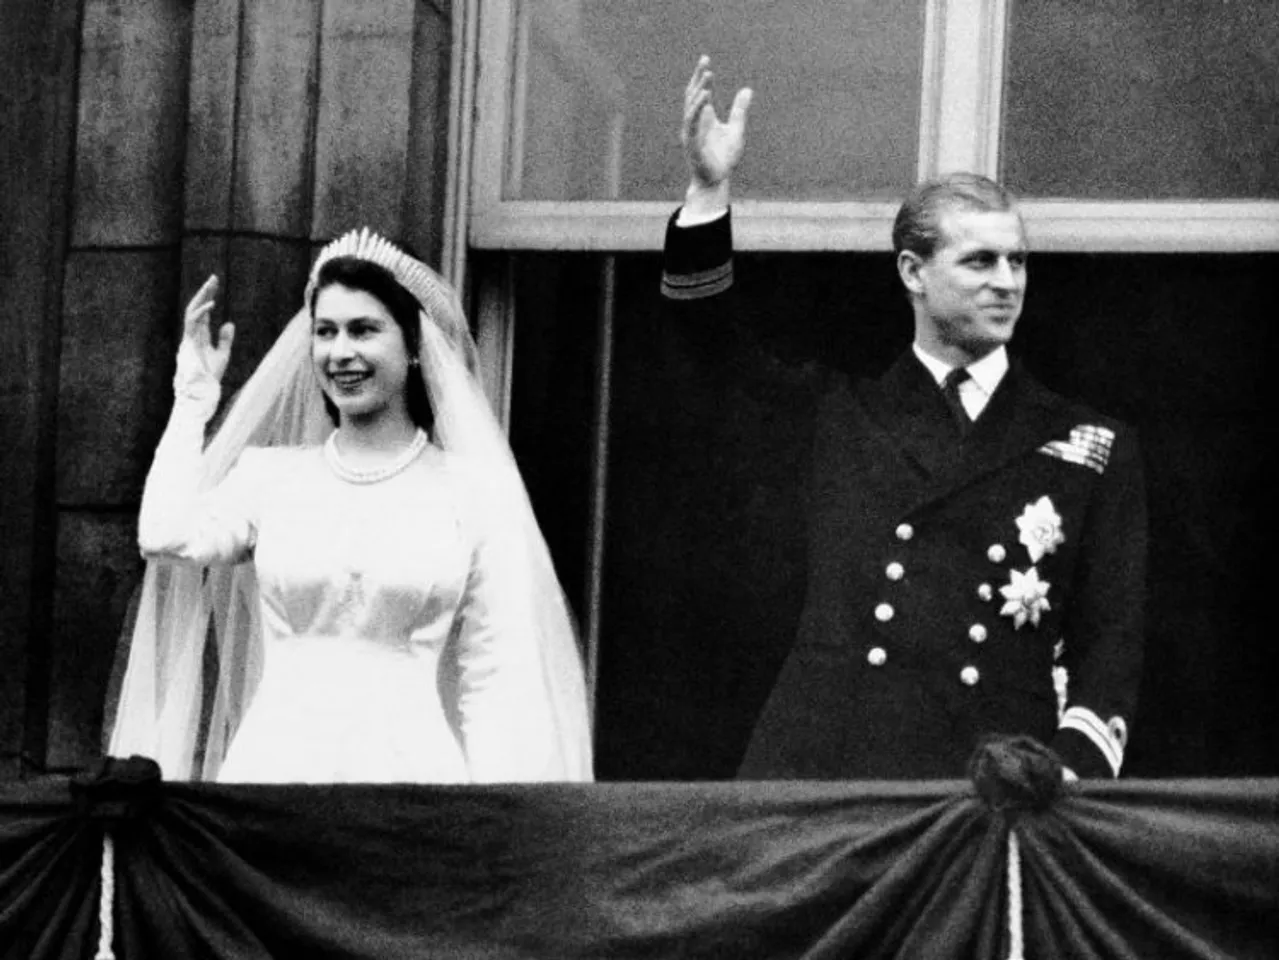 Britain's Princess Elizabeth and Prince Philip, the Duke of Edinburgh wave to the crowds from the balcony of Buckingham Palace in London, after their wedding, Nov. 20, 1947. Queen Elizabeth II, Britain's longest-reigning monarch and a rock of stability across much of a turbulent century, has died. She was 96. Buckingham Palace made the announcement in a statement on Thursday Sept. 8, 2022. (AP Photo, File)